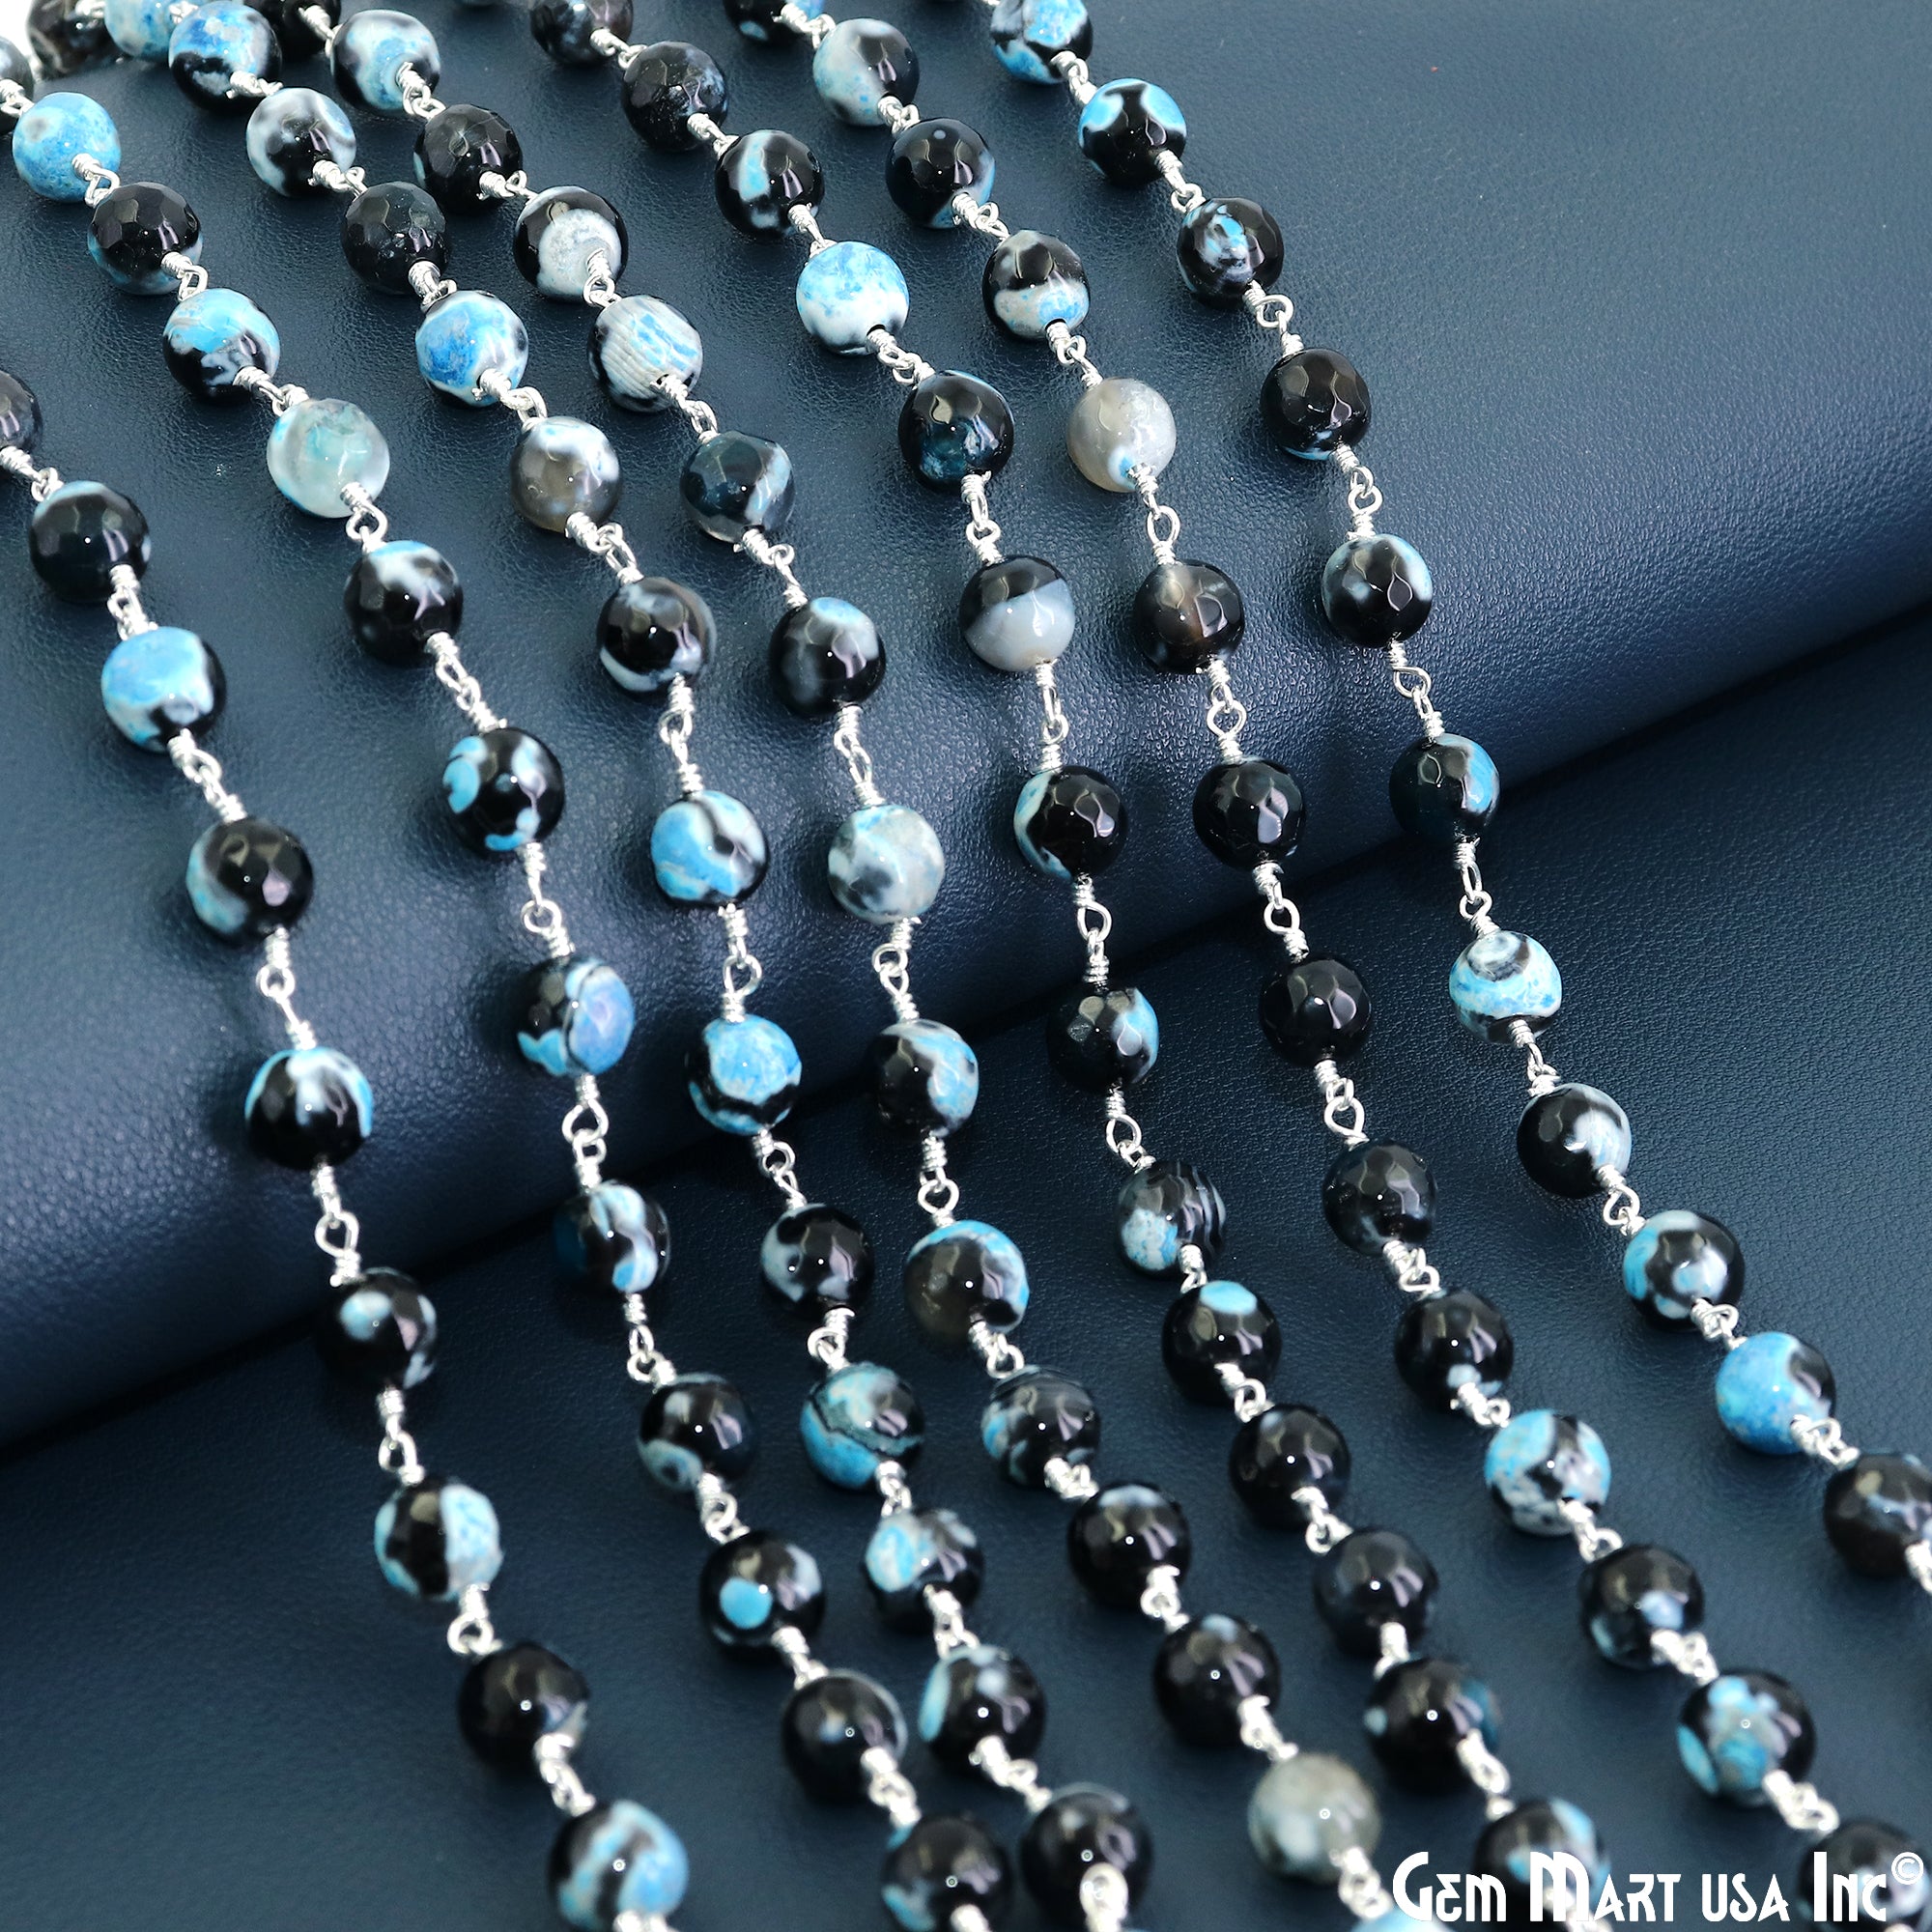 Shaded Turquoise jade Faceted Beads 8mm Silver Wire Wrapped Rosary Chain